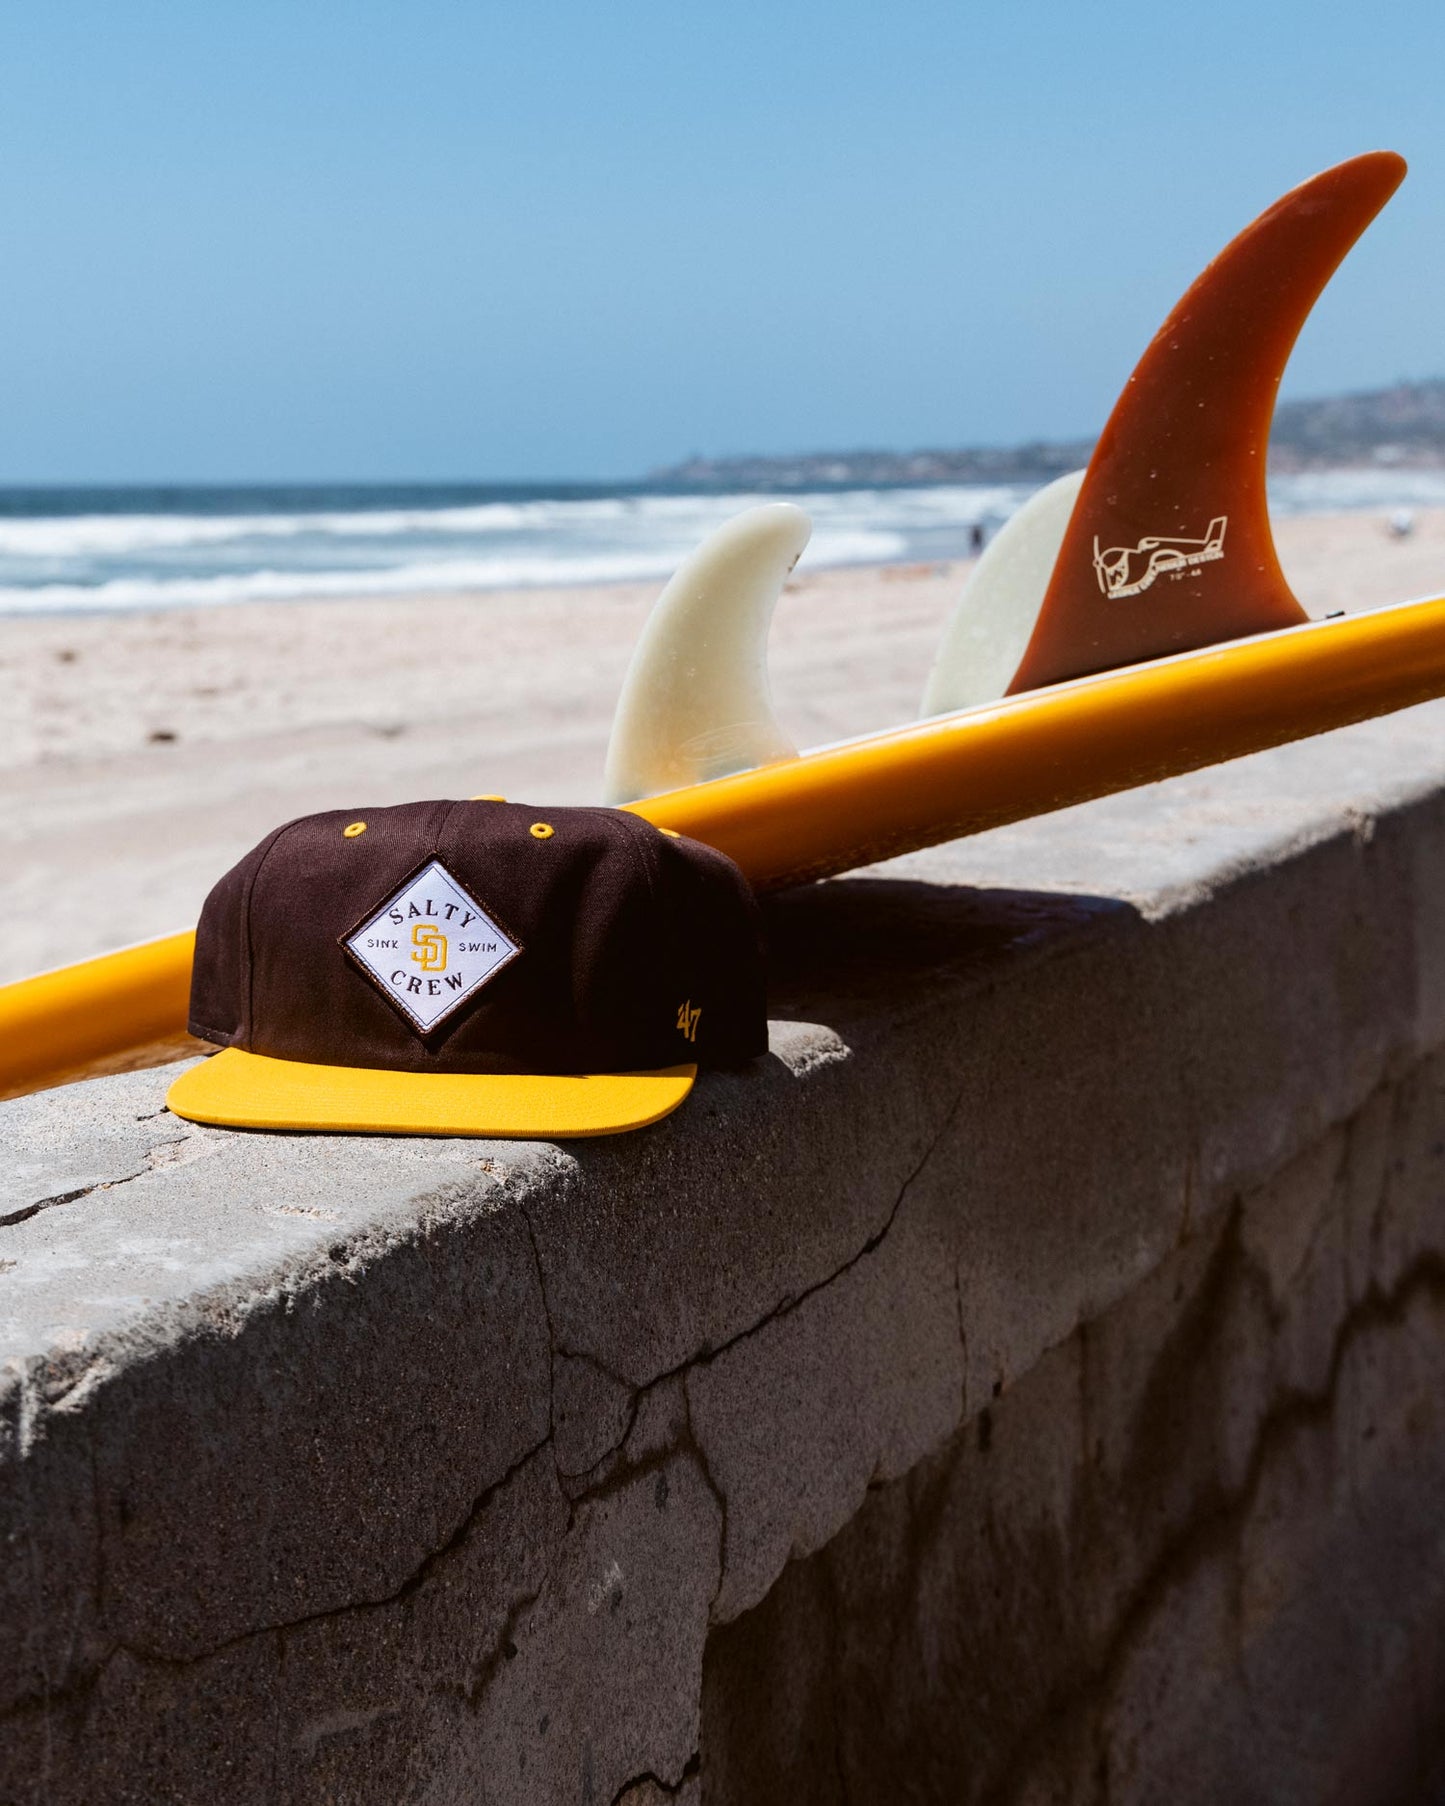 Salty Crew x Padres x 47 Brown Unstructured Snapback